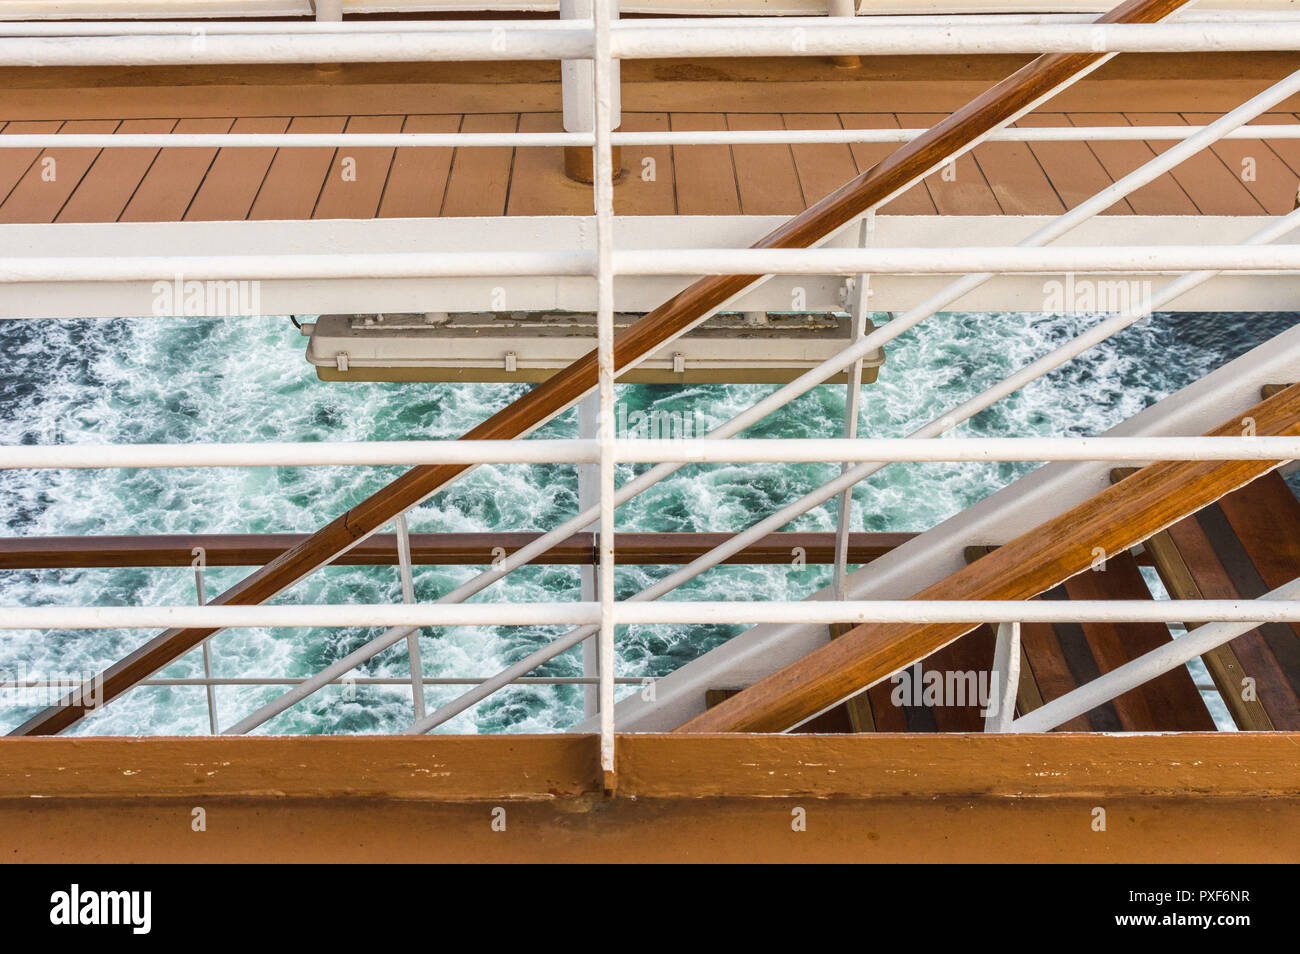 Graphic image of exterior access stairway, decks and ship's wake, stern of cruise ship, Inside Passage, British Columbia, Canada. Stock Photo